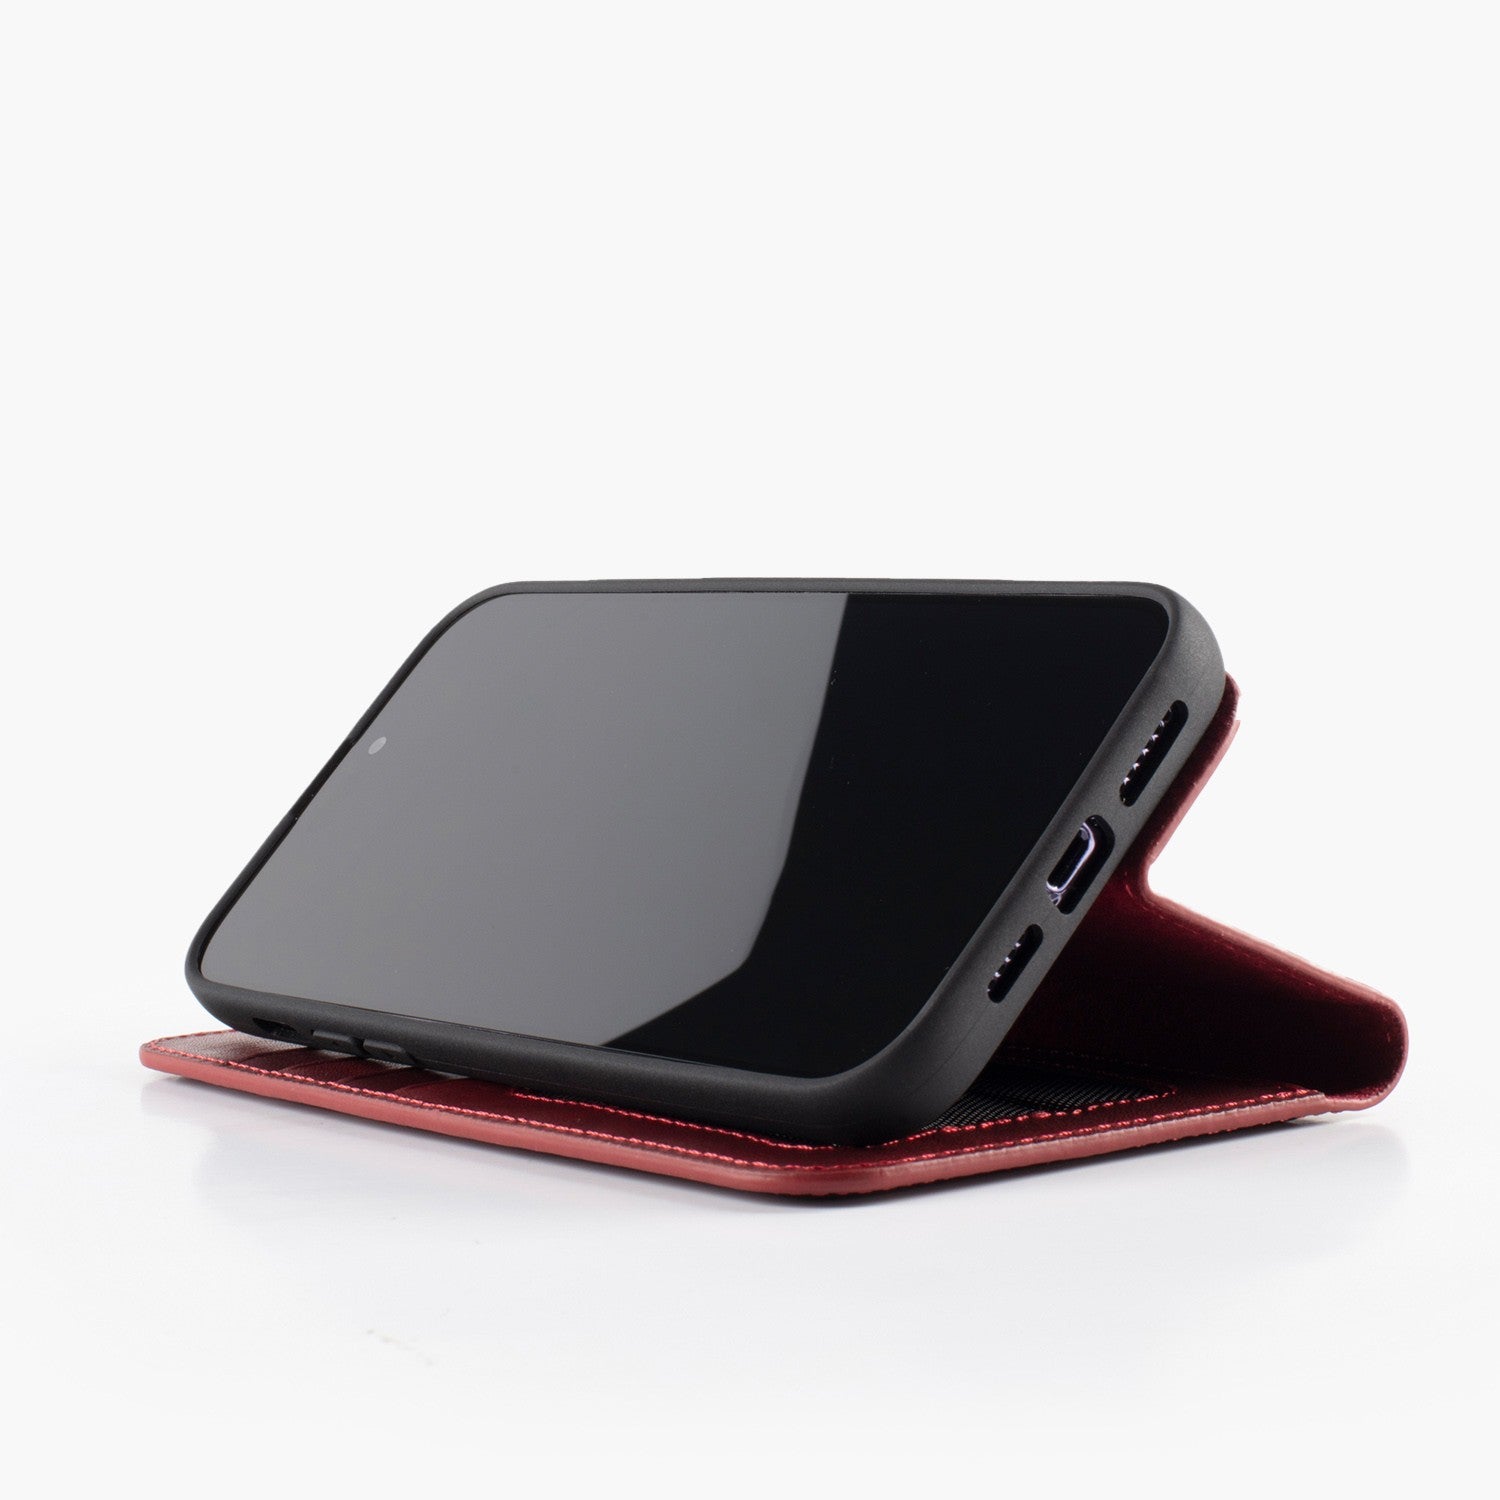 Wachikopa leather Magic Book Case 2 in 1 for iPhone 11 Pro Max Red